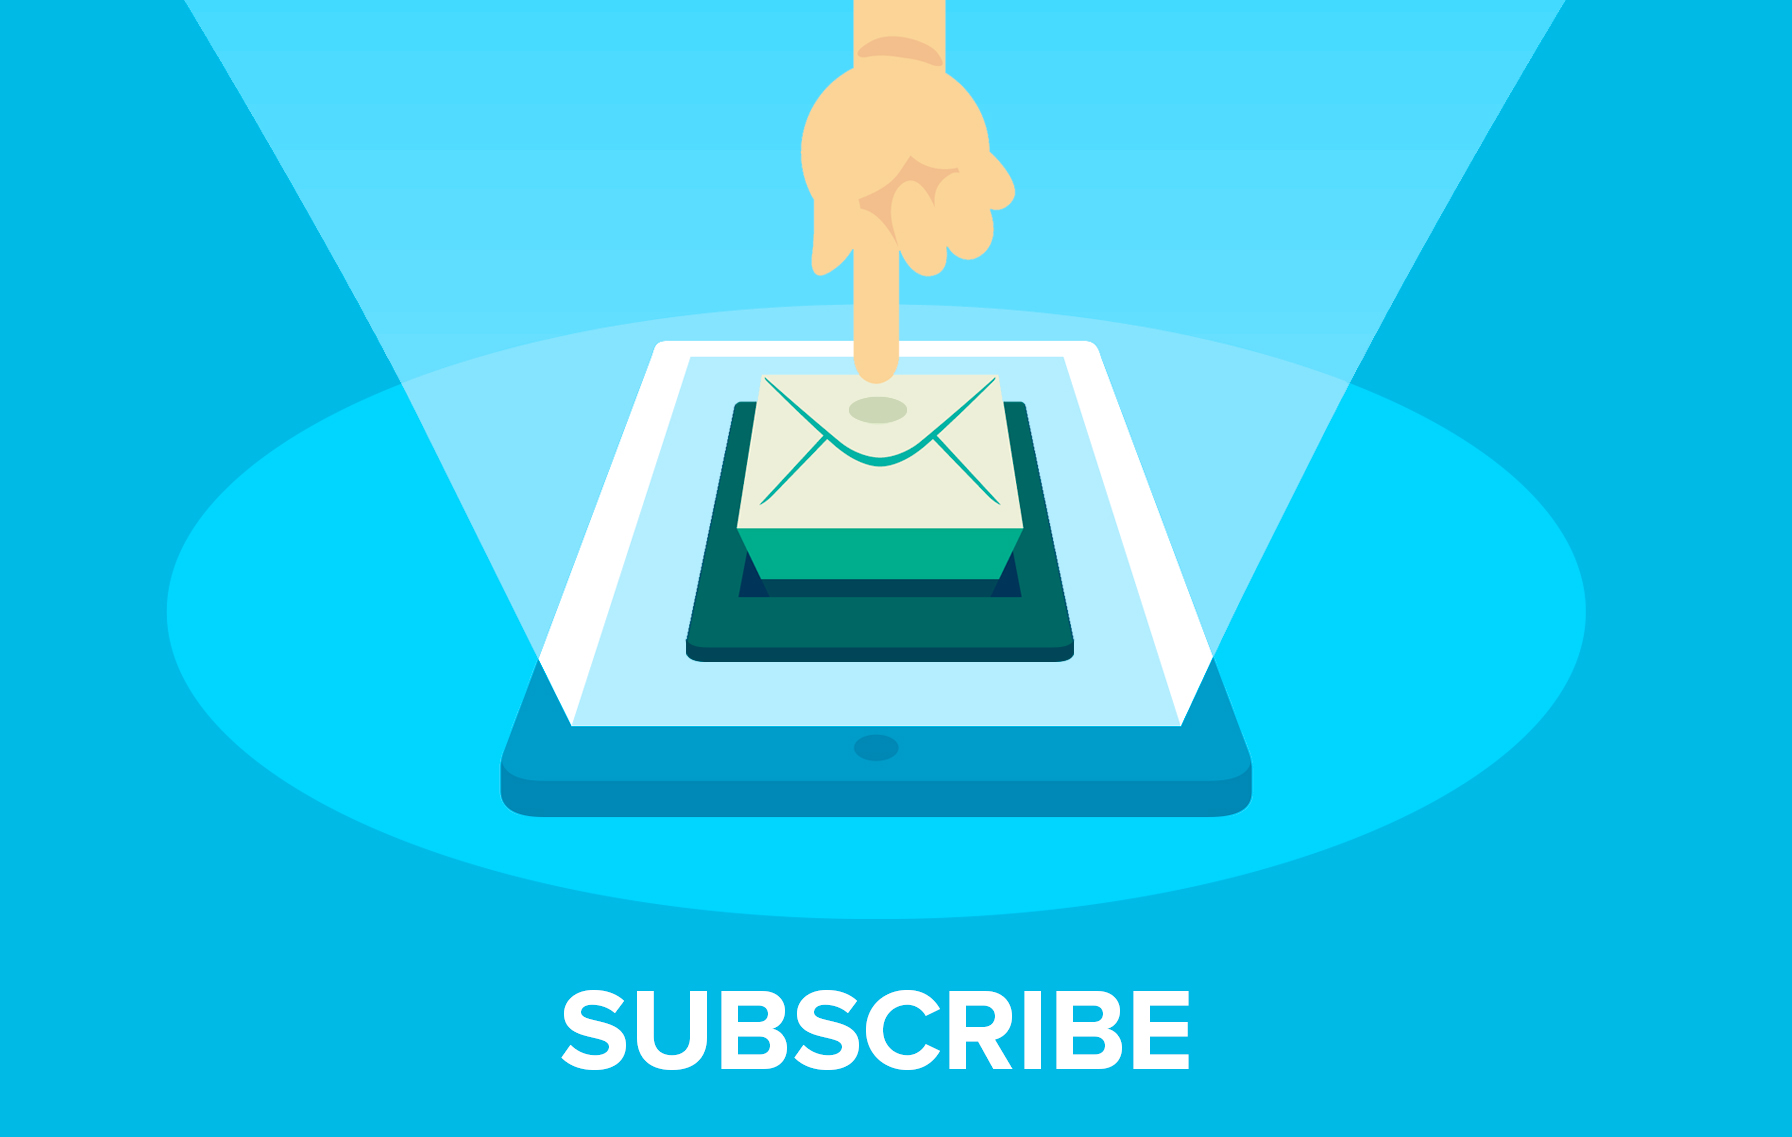 5 Surefire Ways to Grow Your Subscription-Based Mobile App